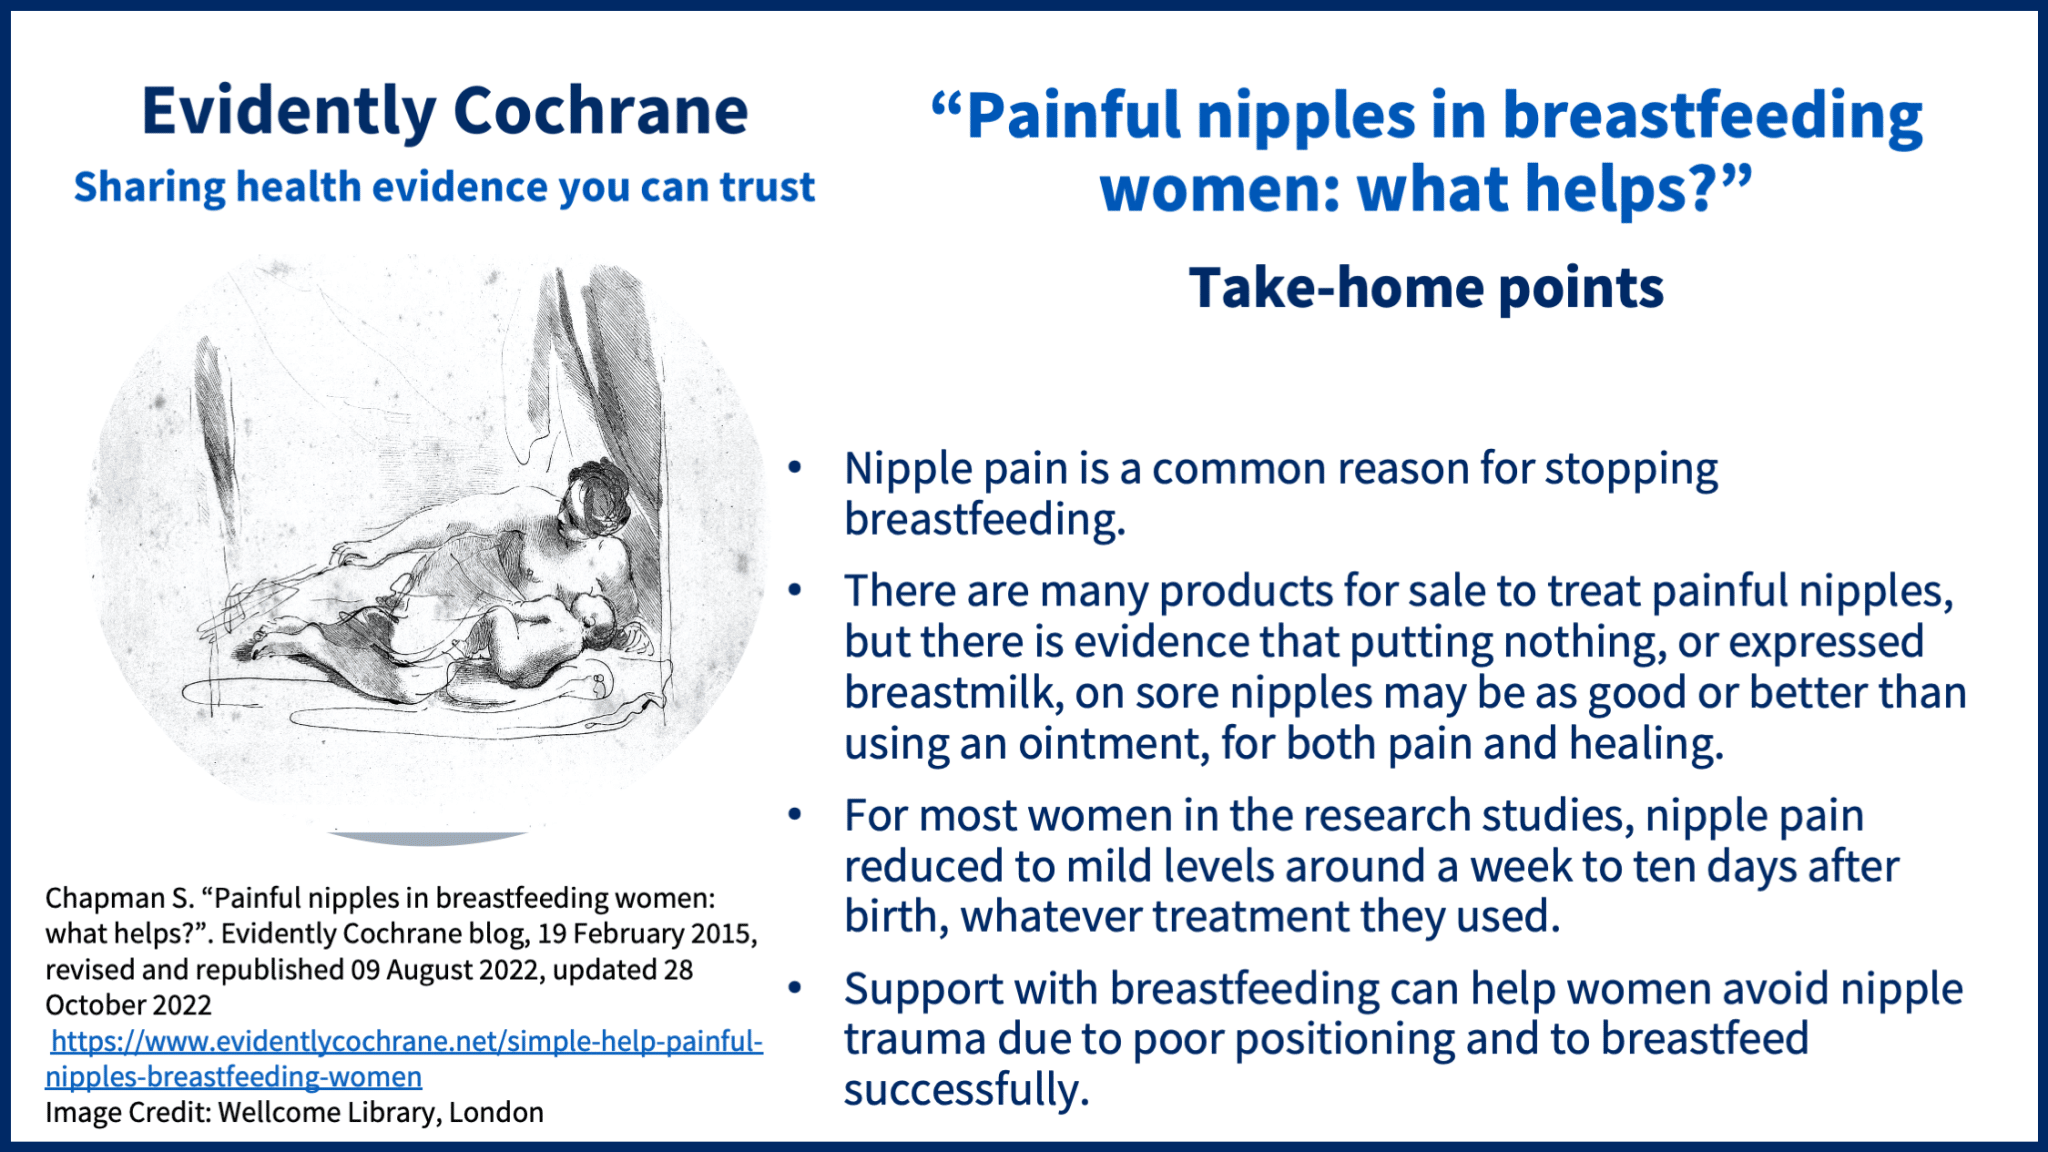 https://www.evidentlycochrane.net/wp-content/uploads/2022/08/Chapman-Painful-nipples-Take-home-points.-2022-1.png